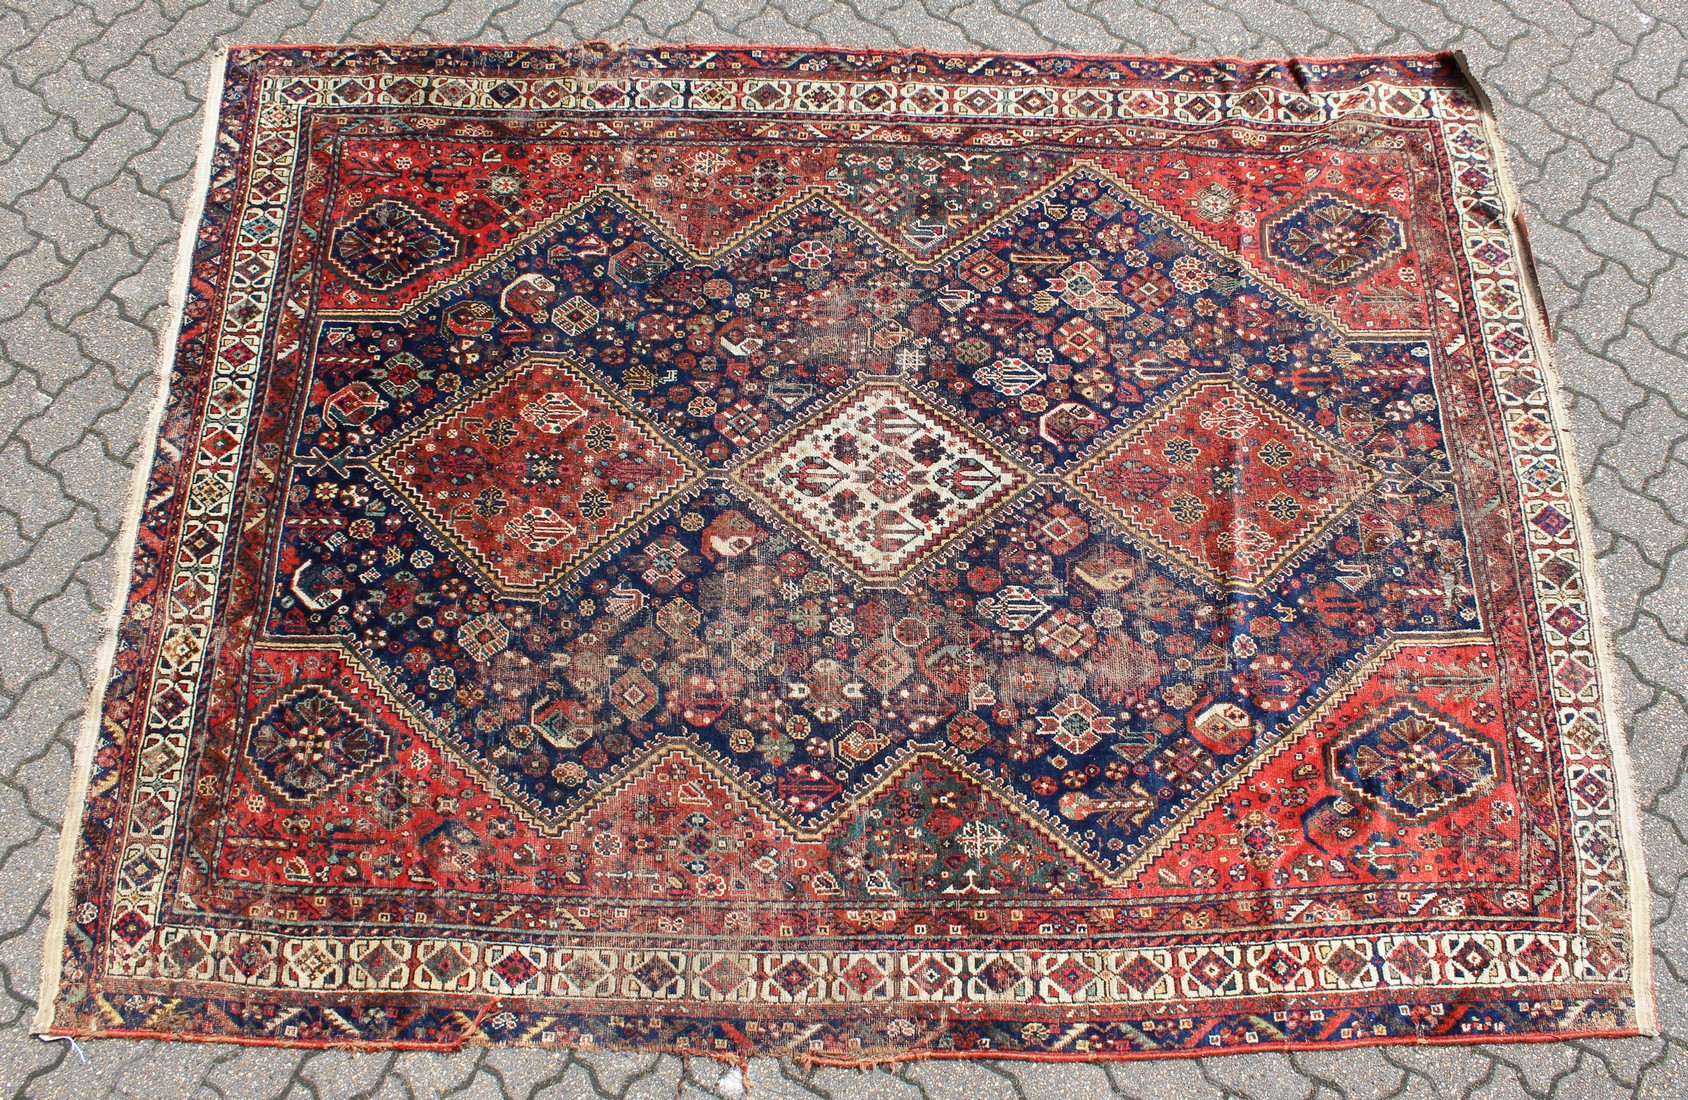 A PERSIAN CARPET with three large diamond design, in red and blue. 9ft long x 6ft 10ins wide.